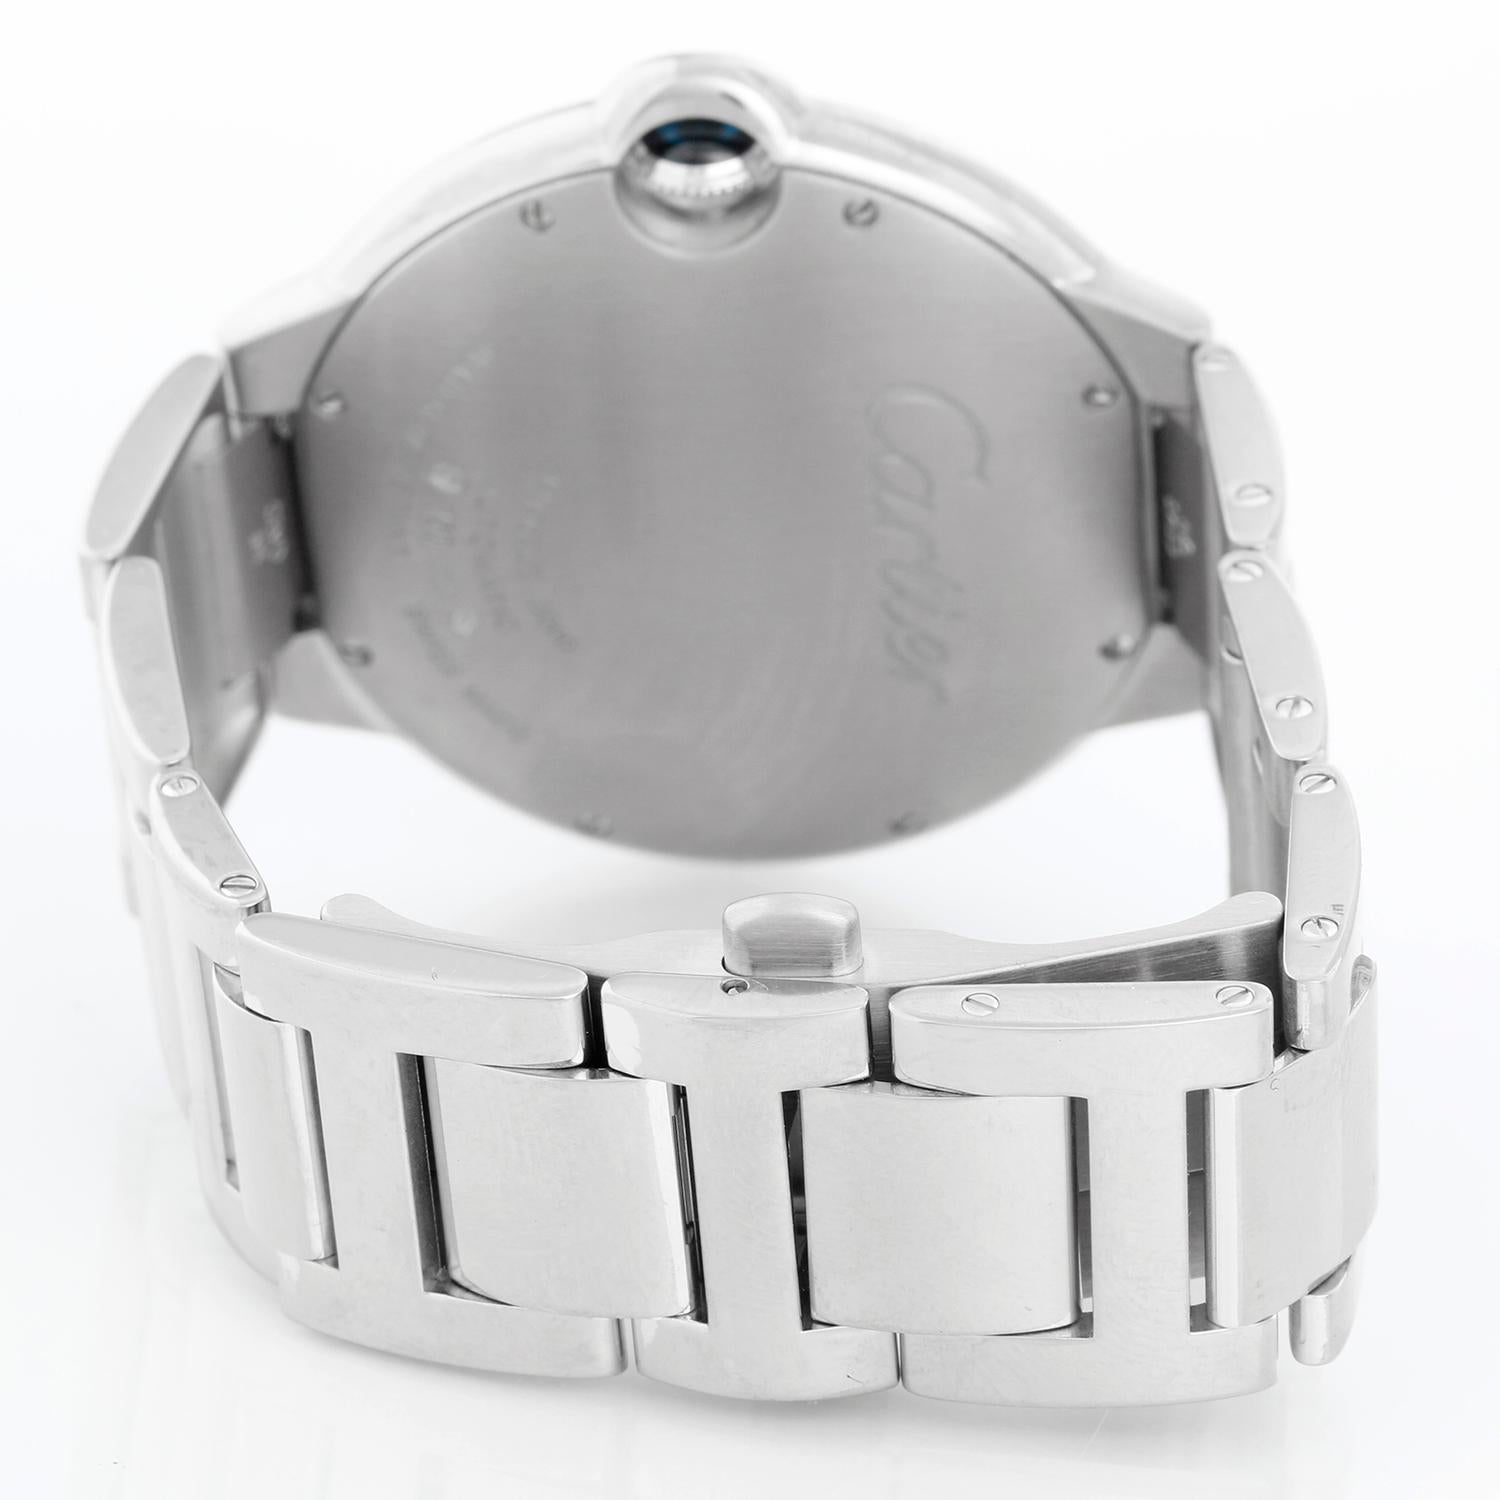 Cartier Ballon Bleu Men's 42mm White Gold Automatic Watch W69013Z2 - Automatic winding. White gold (42mm diameter). Silver guilloche dial with black Roman numerals; date at 3 o'clock. White gold Cartier bracelet with deployant clasp. Pre-owned with